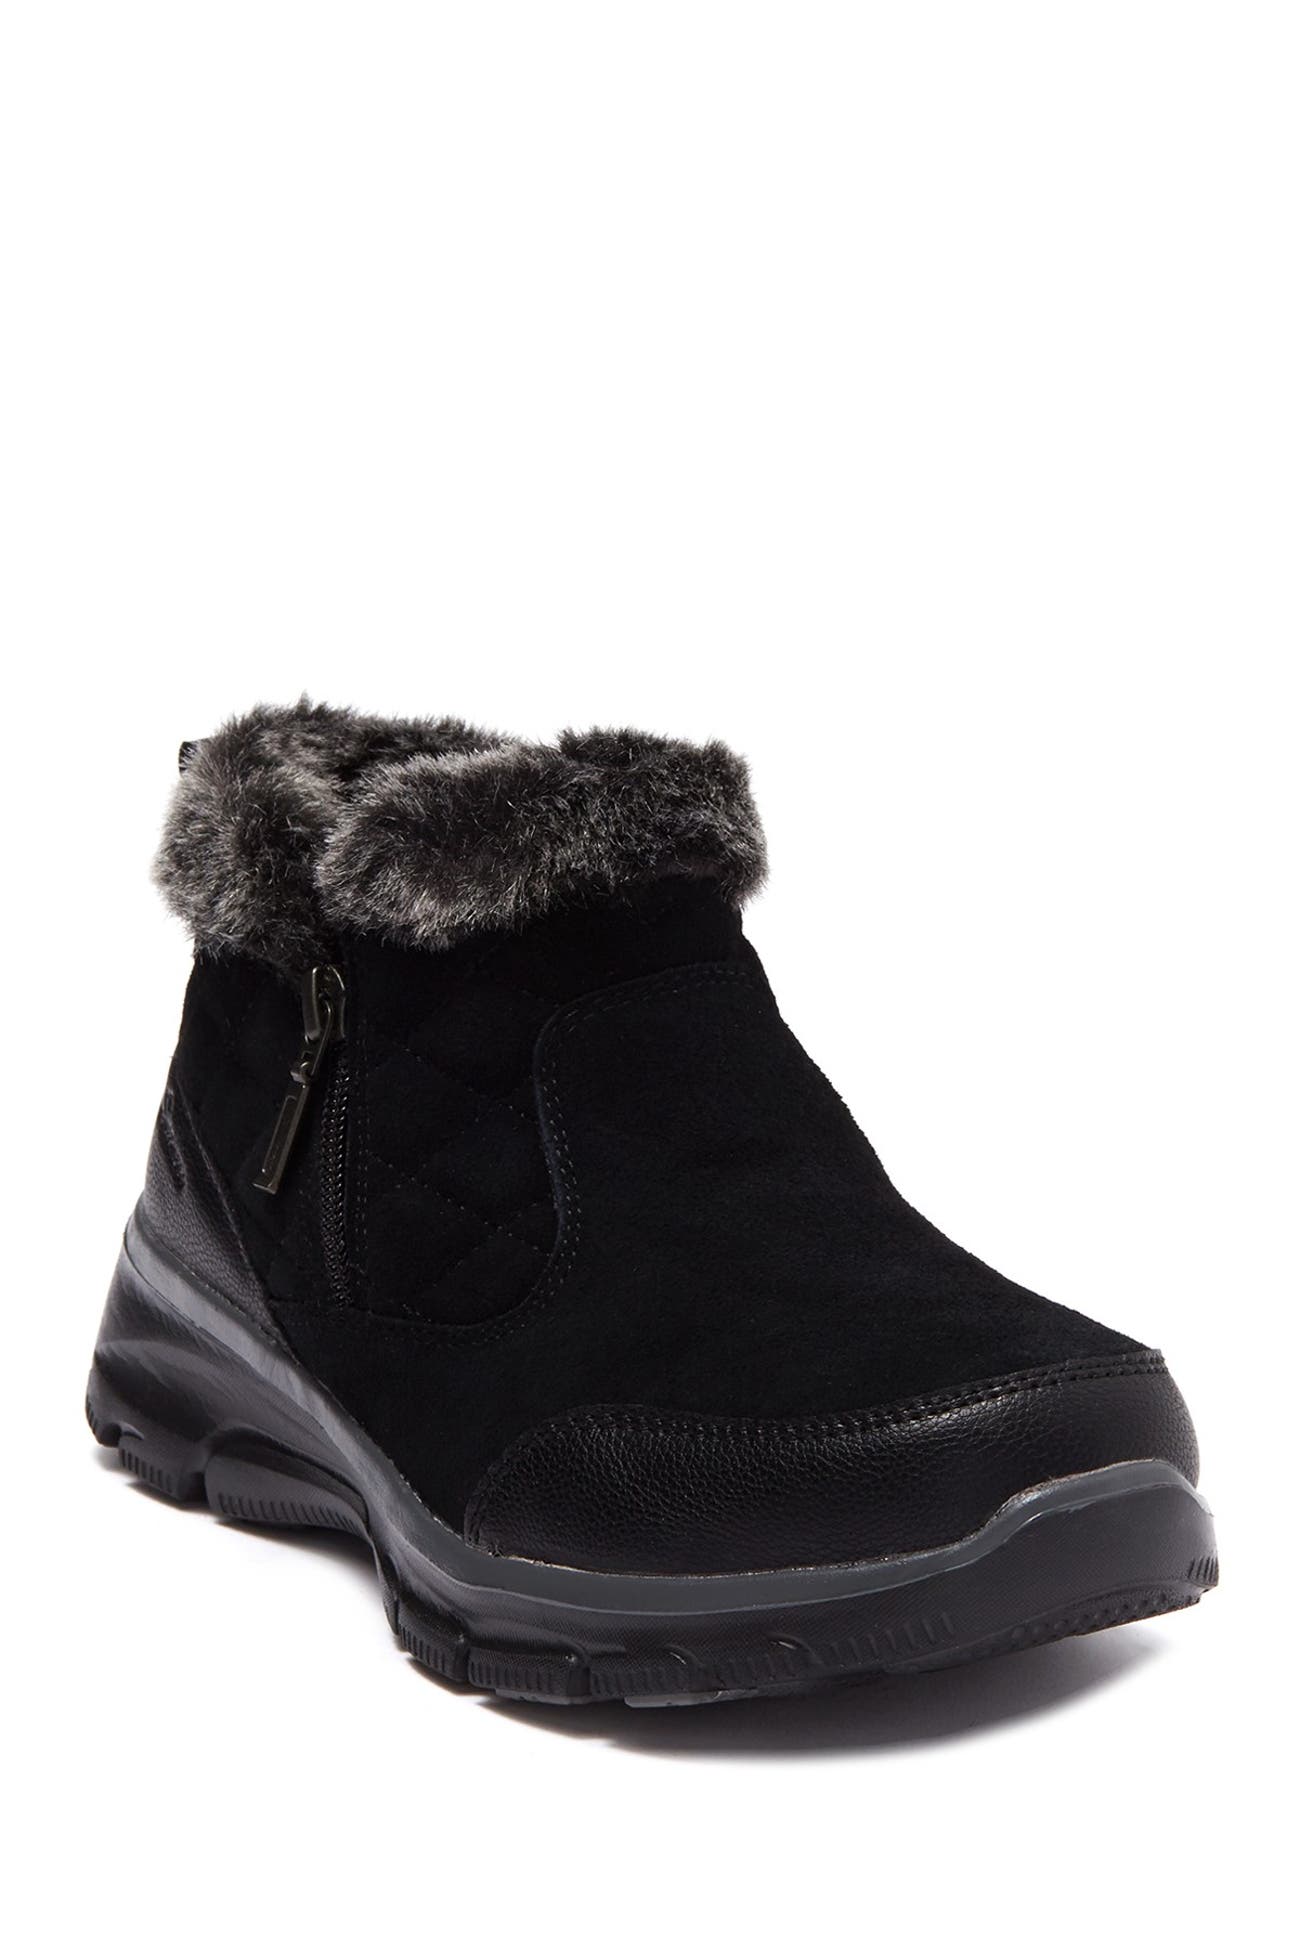 Skechers | Easy Going Girl Crush Faux Fur Cuff Ankle Boot | Nordstrom Rack